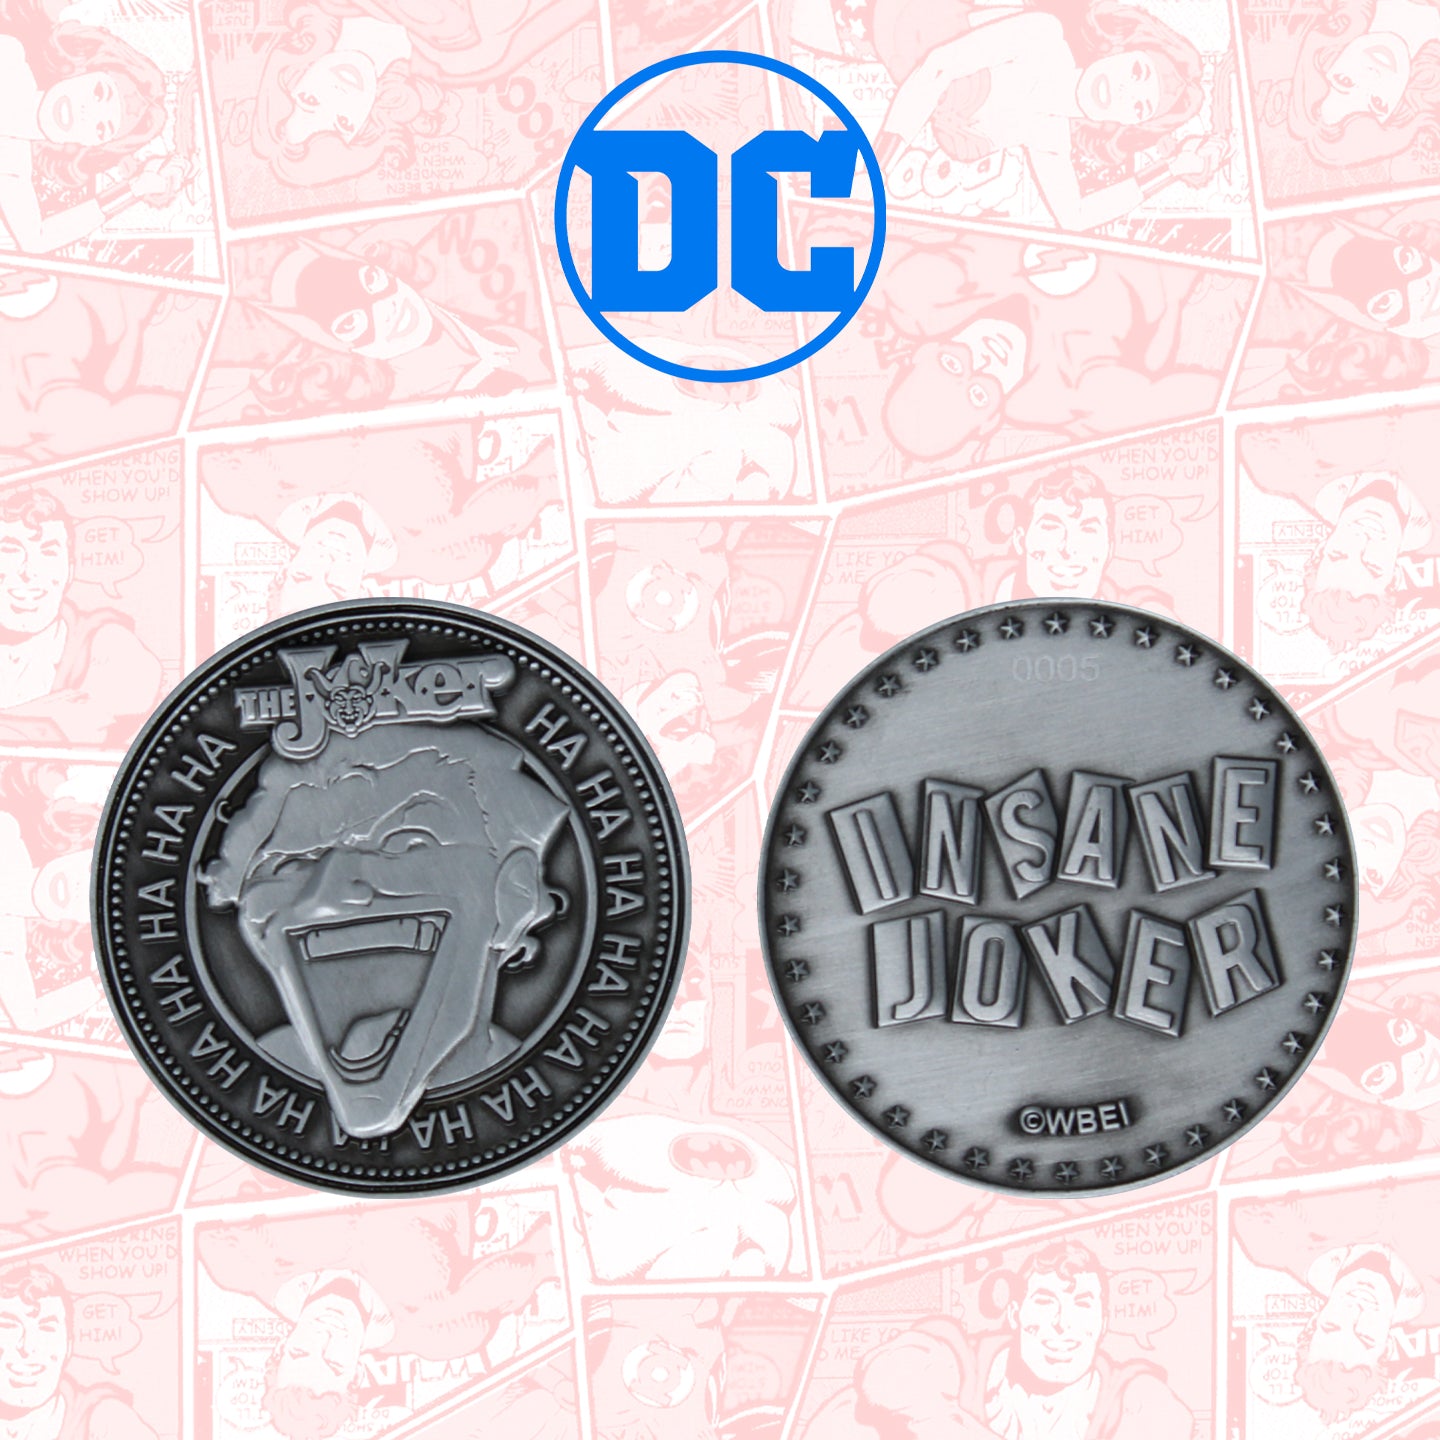 DC Comics Joker Limited Edition Collectible Coin